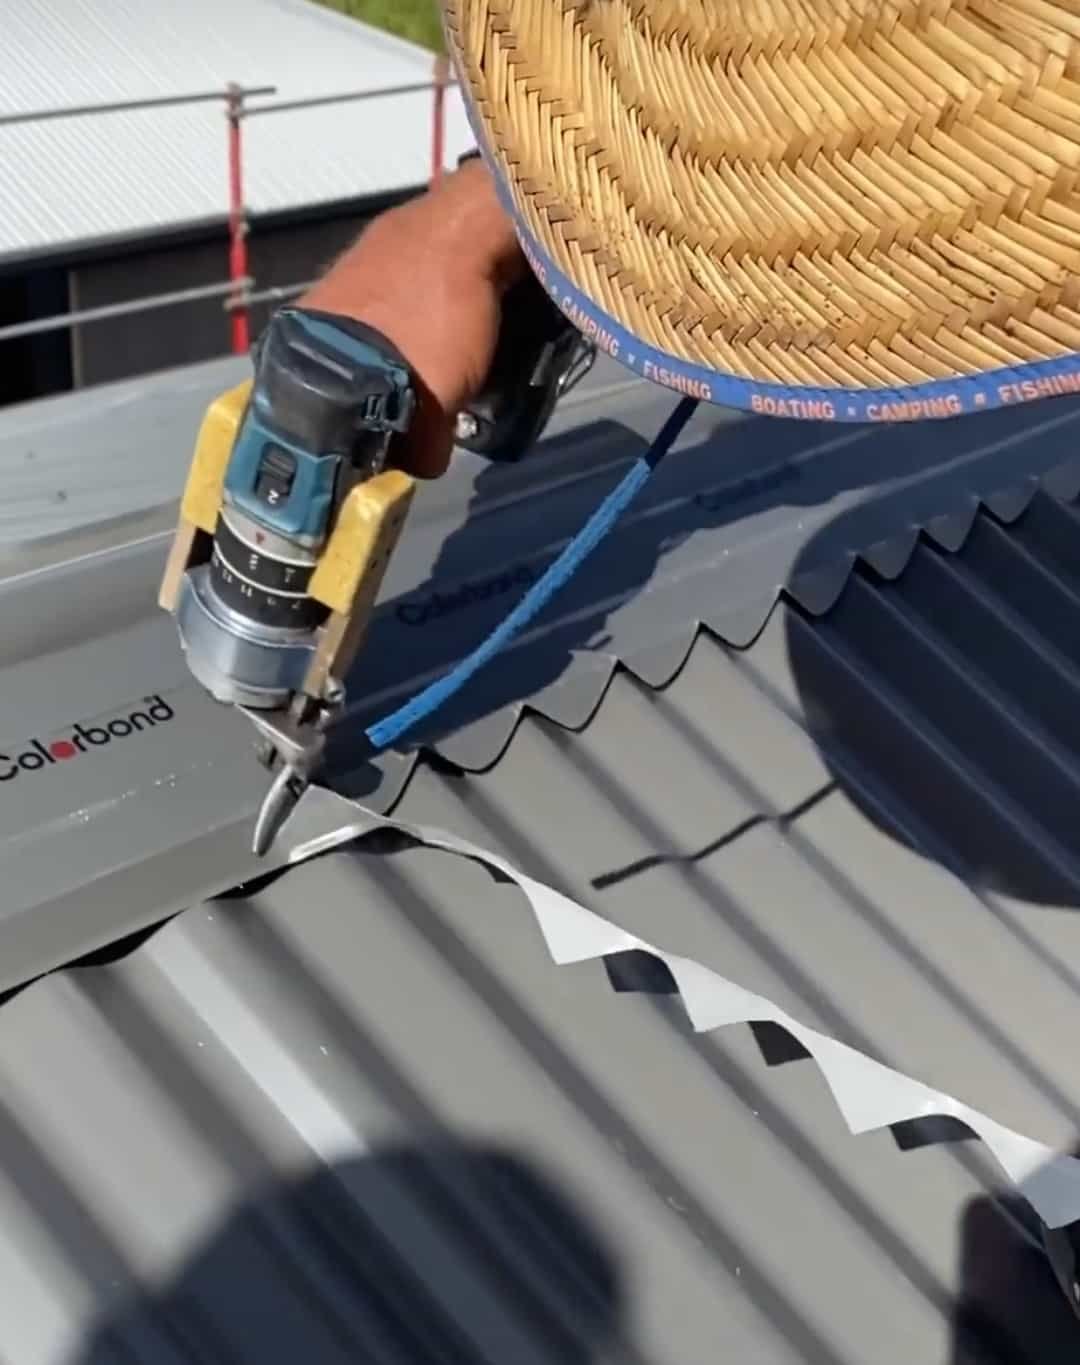 Metal Roof Replacement Melbourne